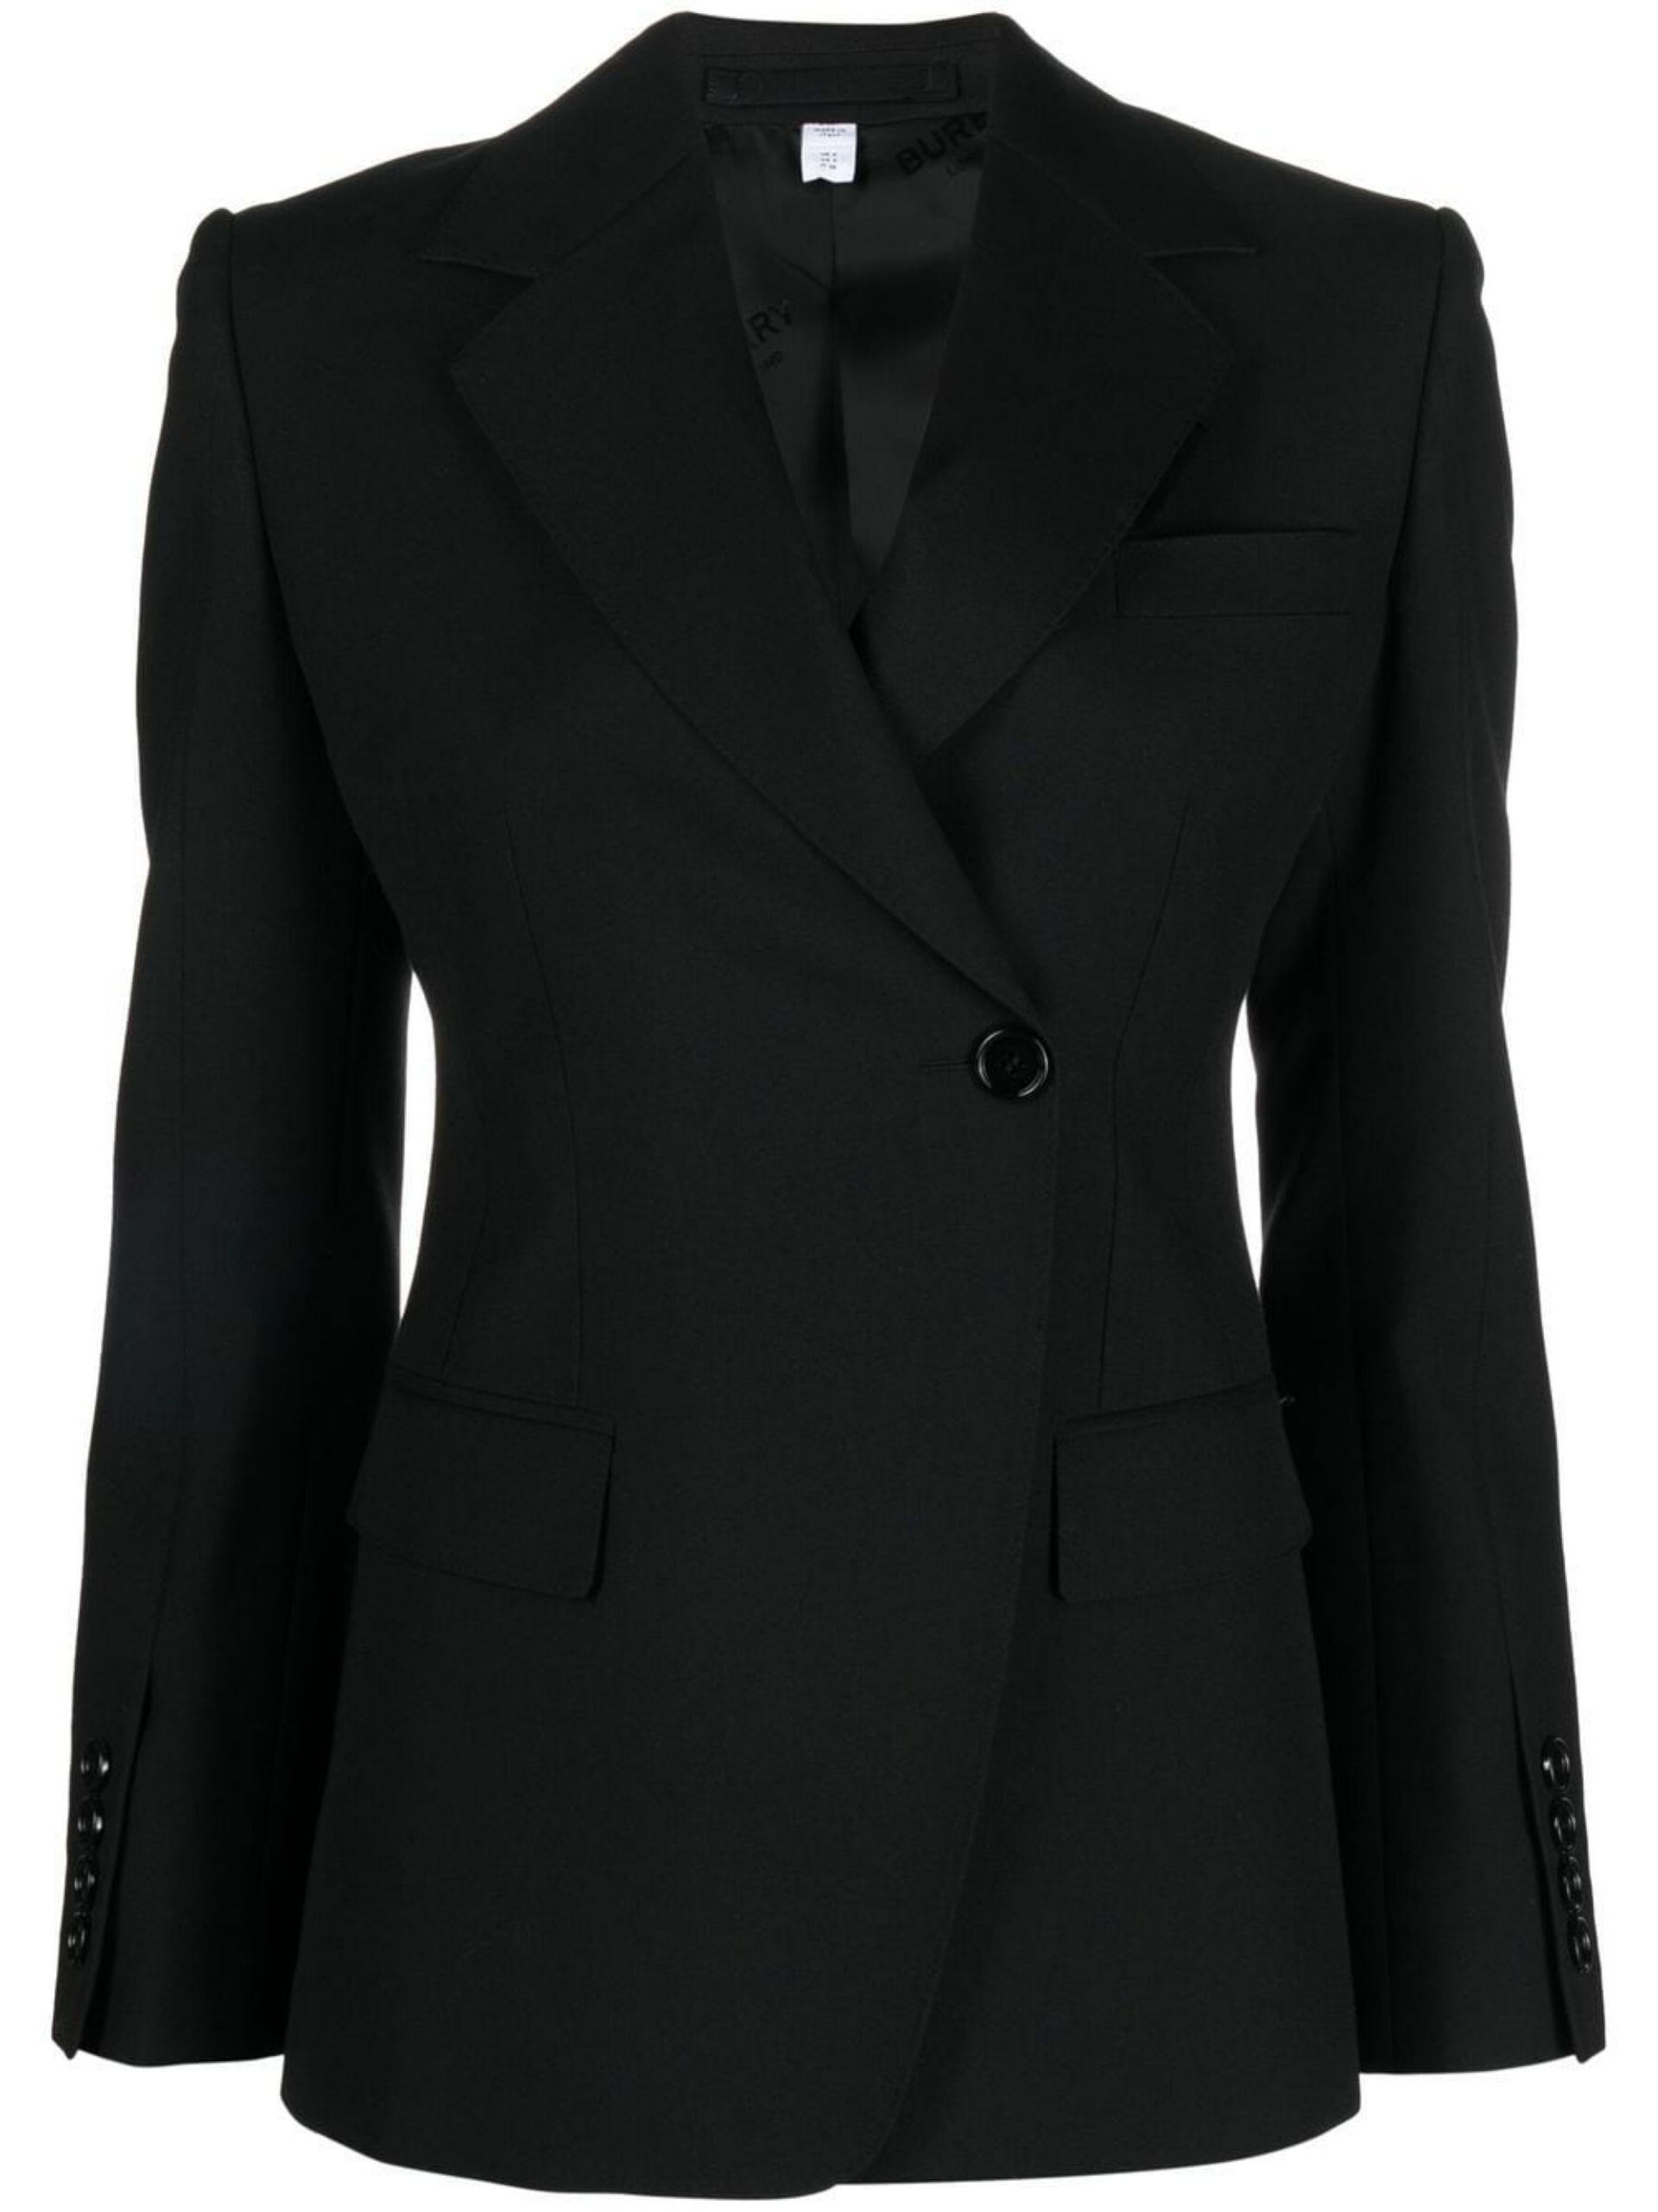 Burberry Single Breasted Tailored Blazer in Black | Lyst